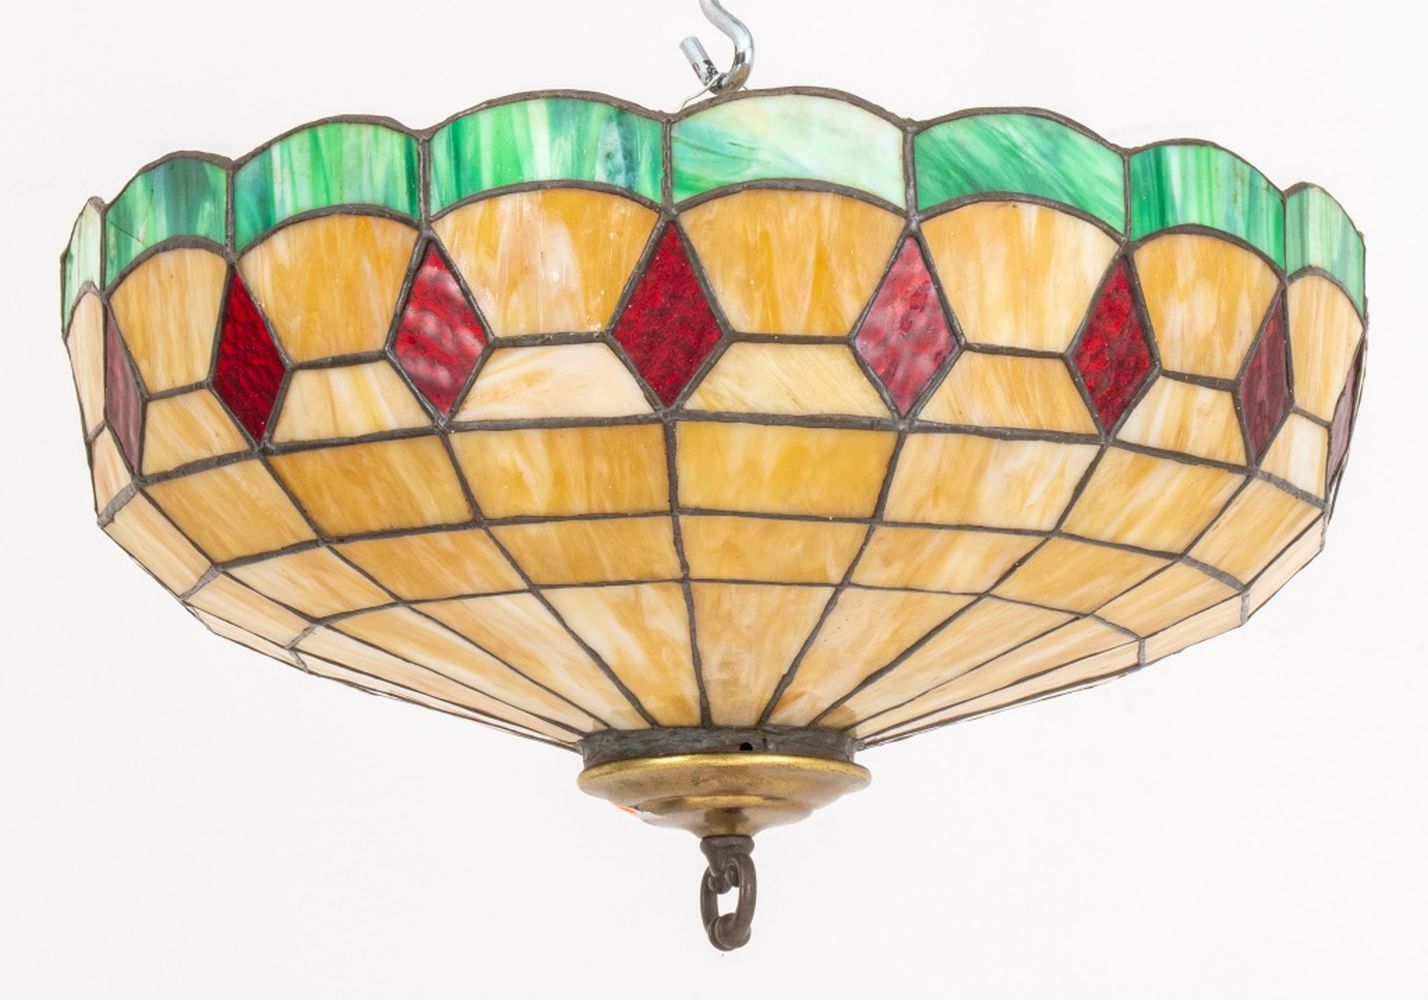 TIFFANY STYLE STAINED GLASS CEILING 3cef9d